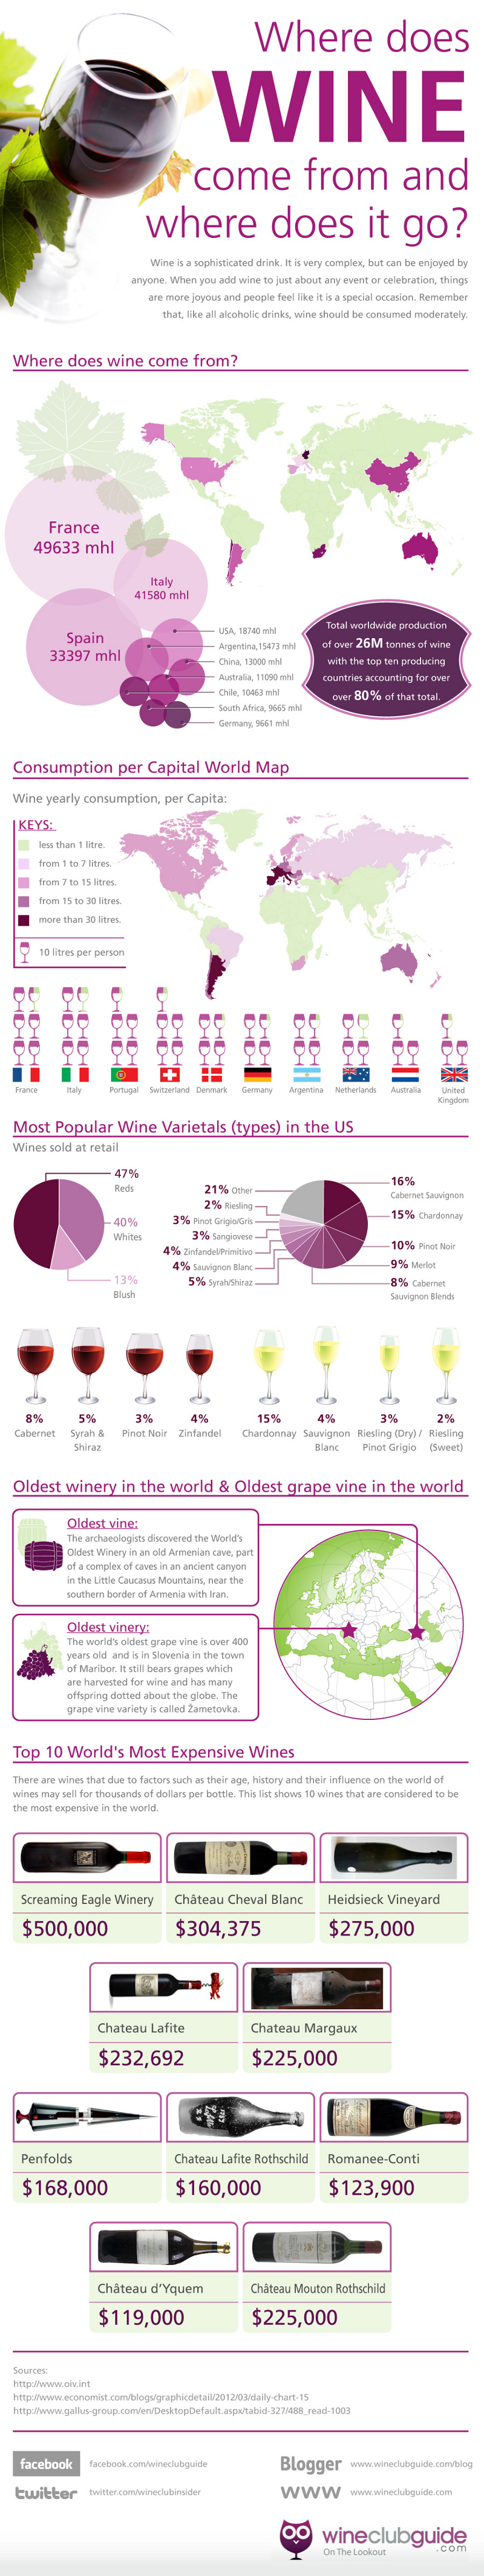 Wine Industry Statistics and Consumption Trends